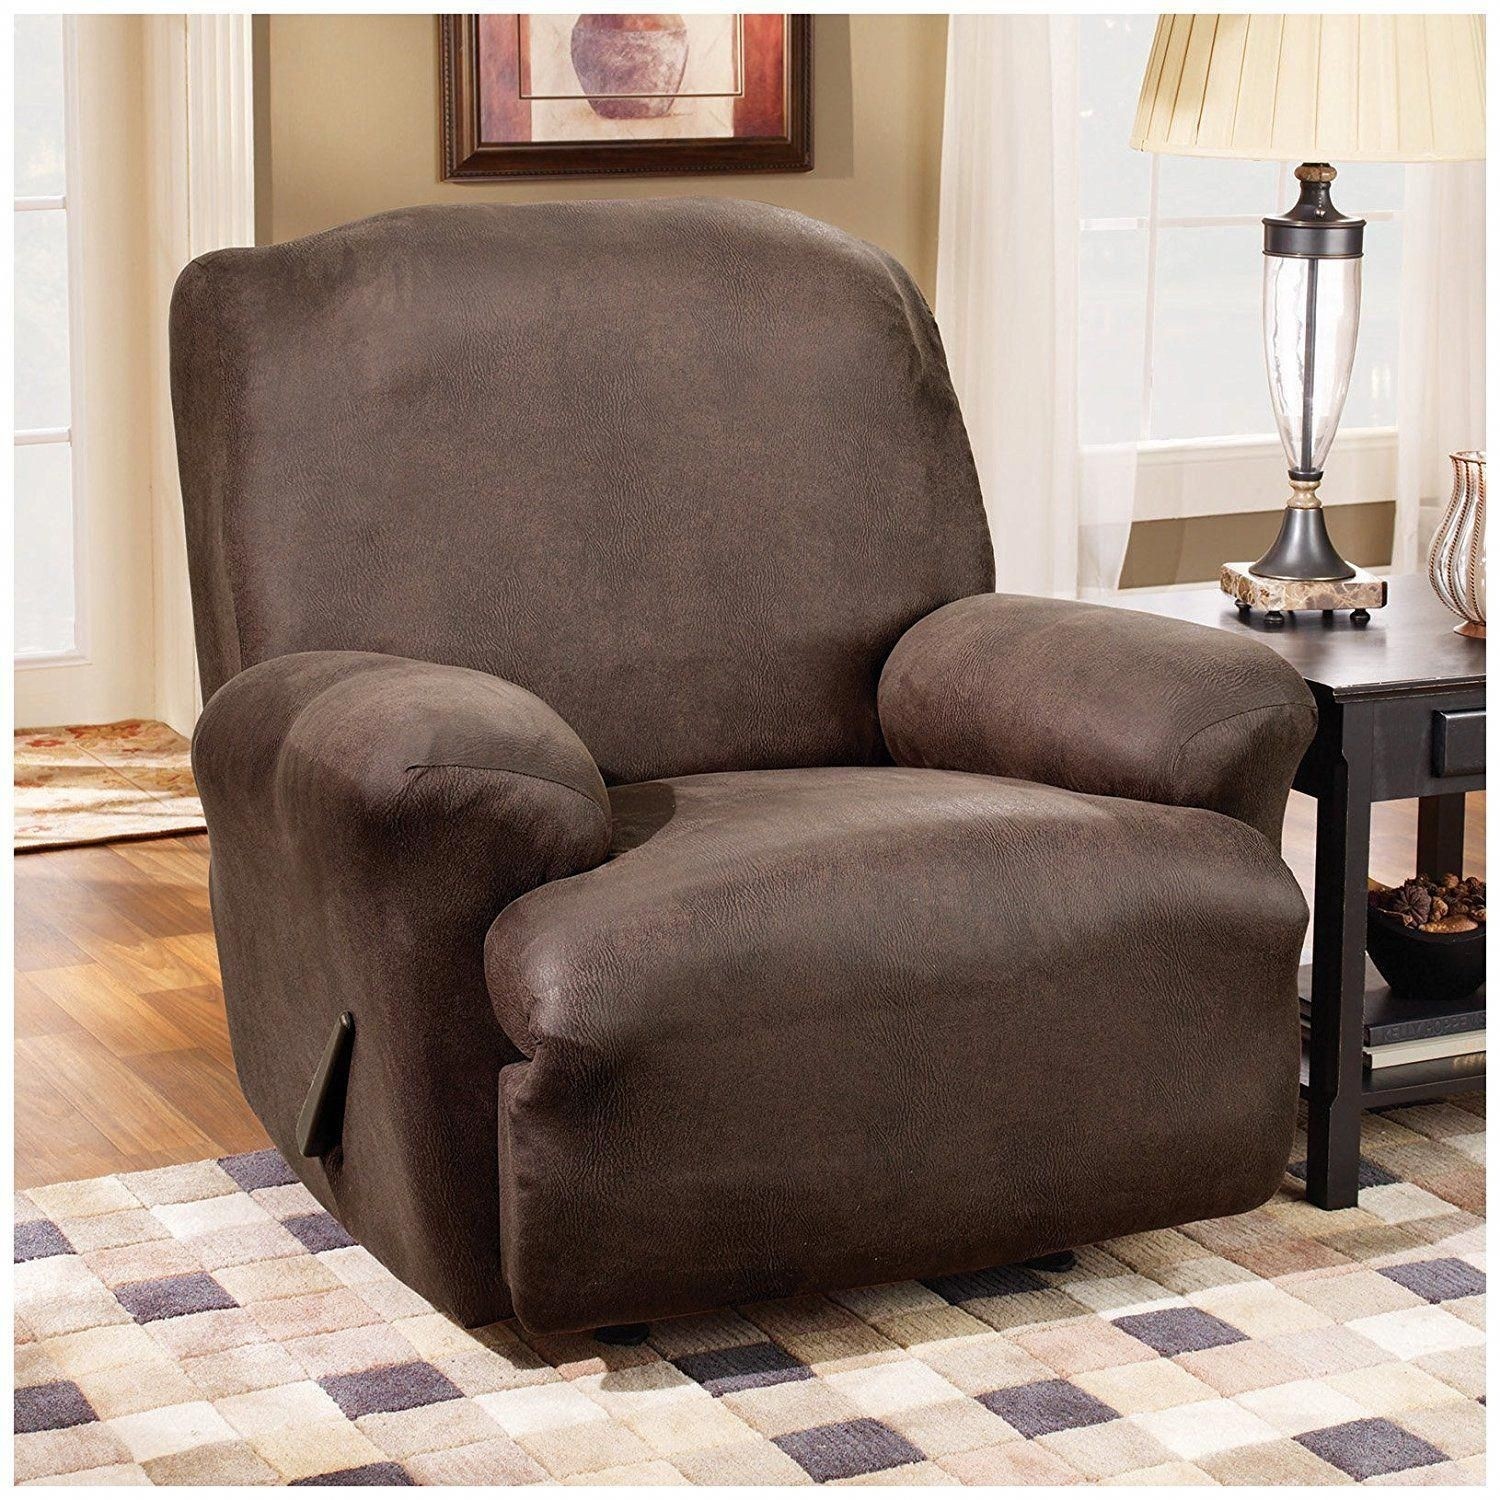 Sure Fit Stretch Leather Recliner Slipcover